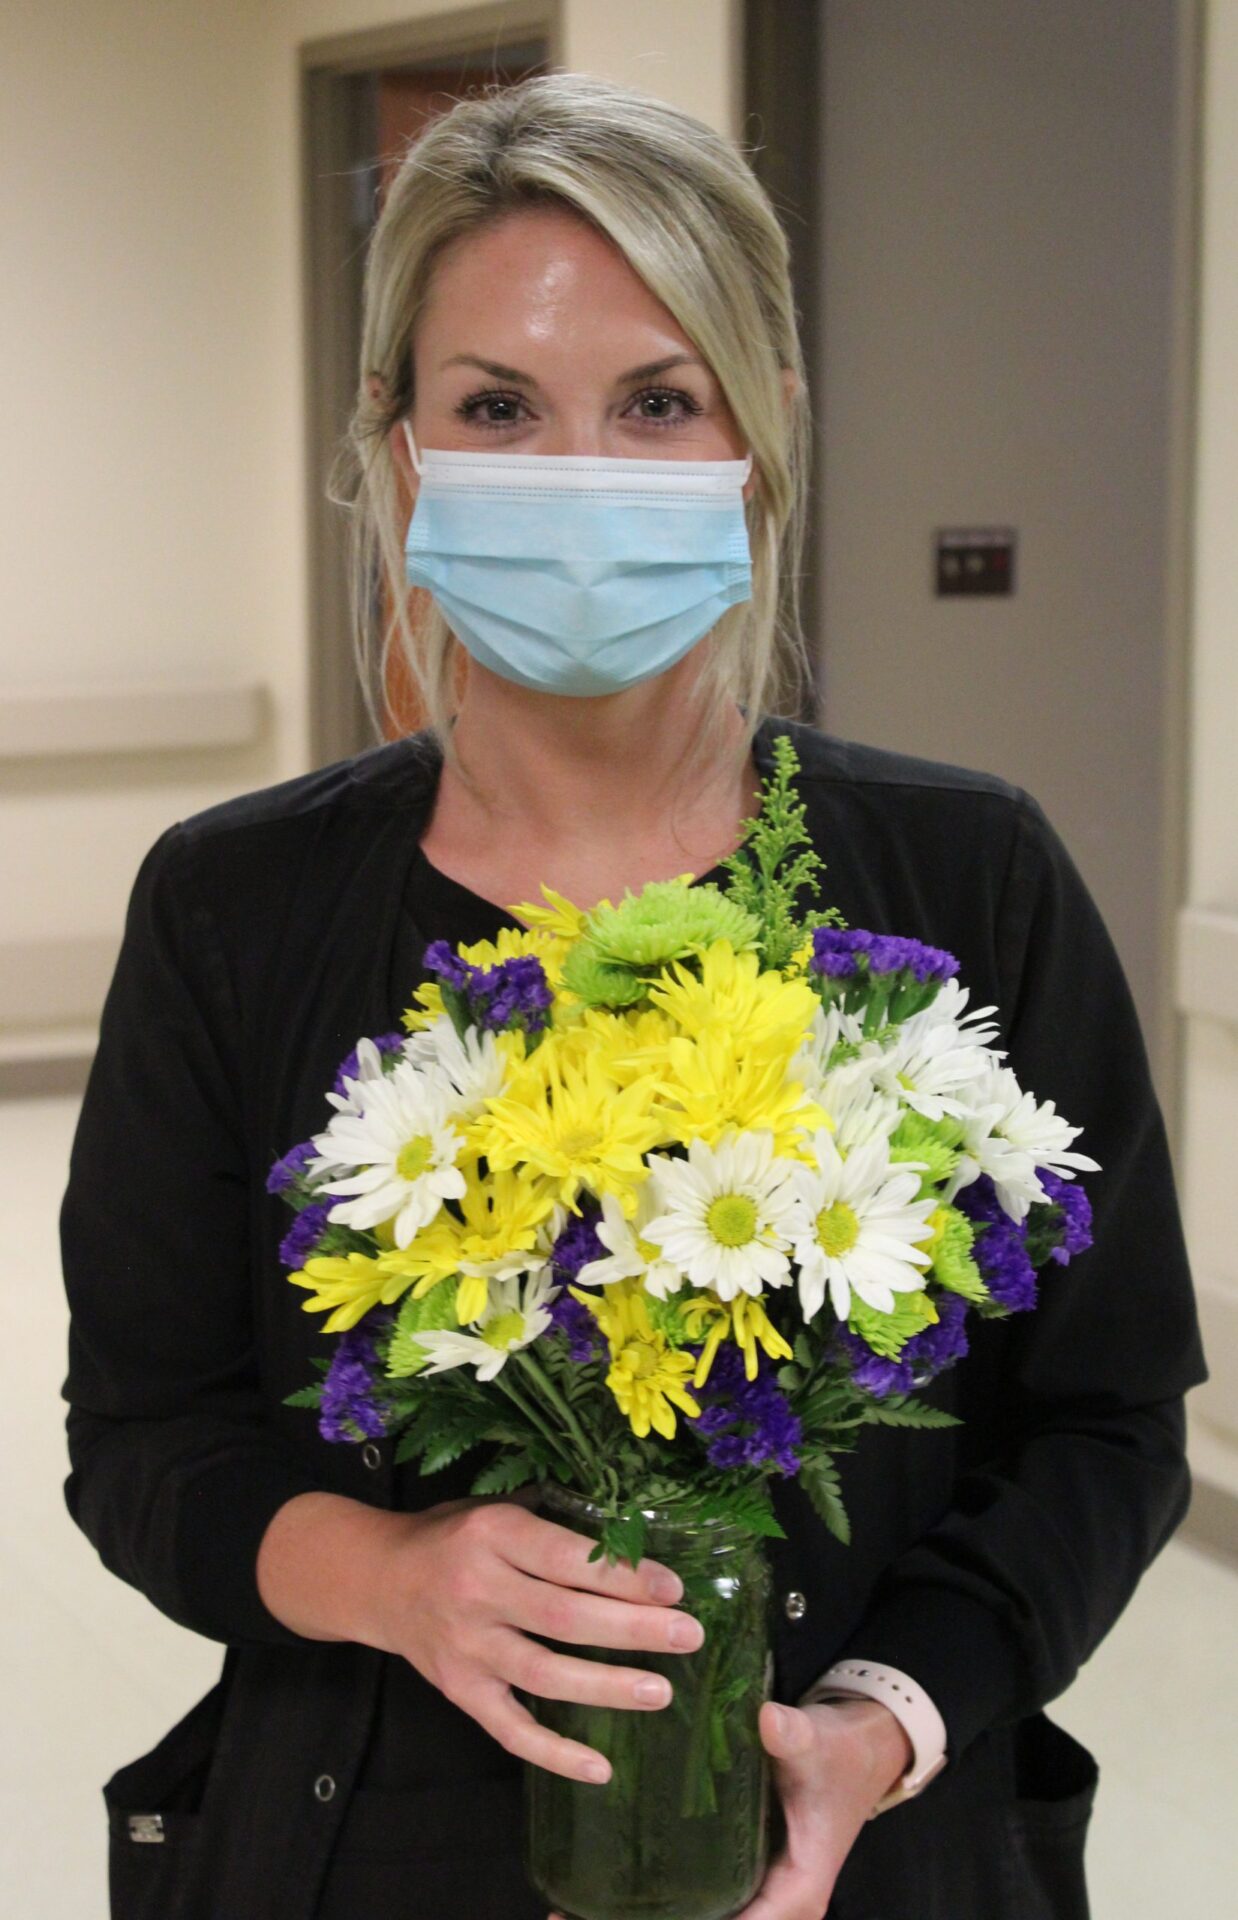 Nurse Laura Ivey dressed in black scrubs holding yellow and white daisies.